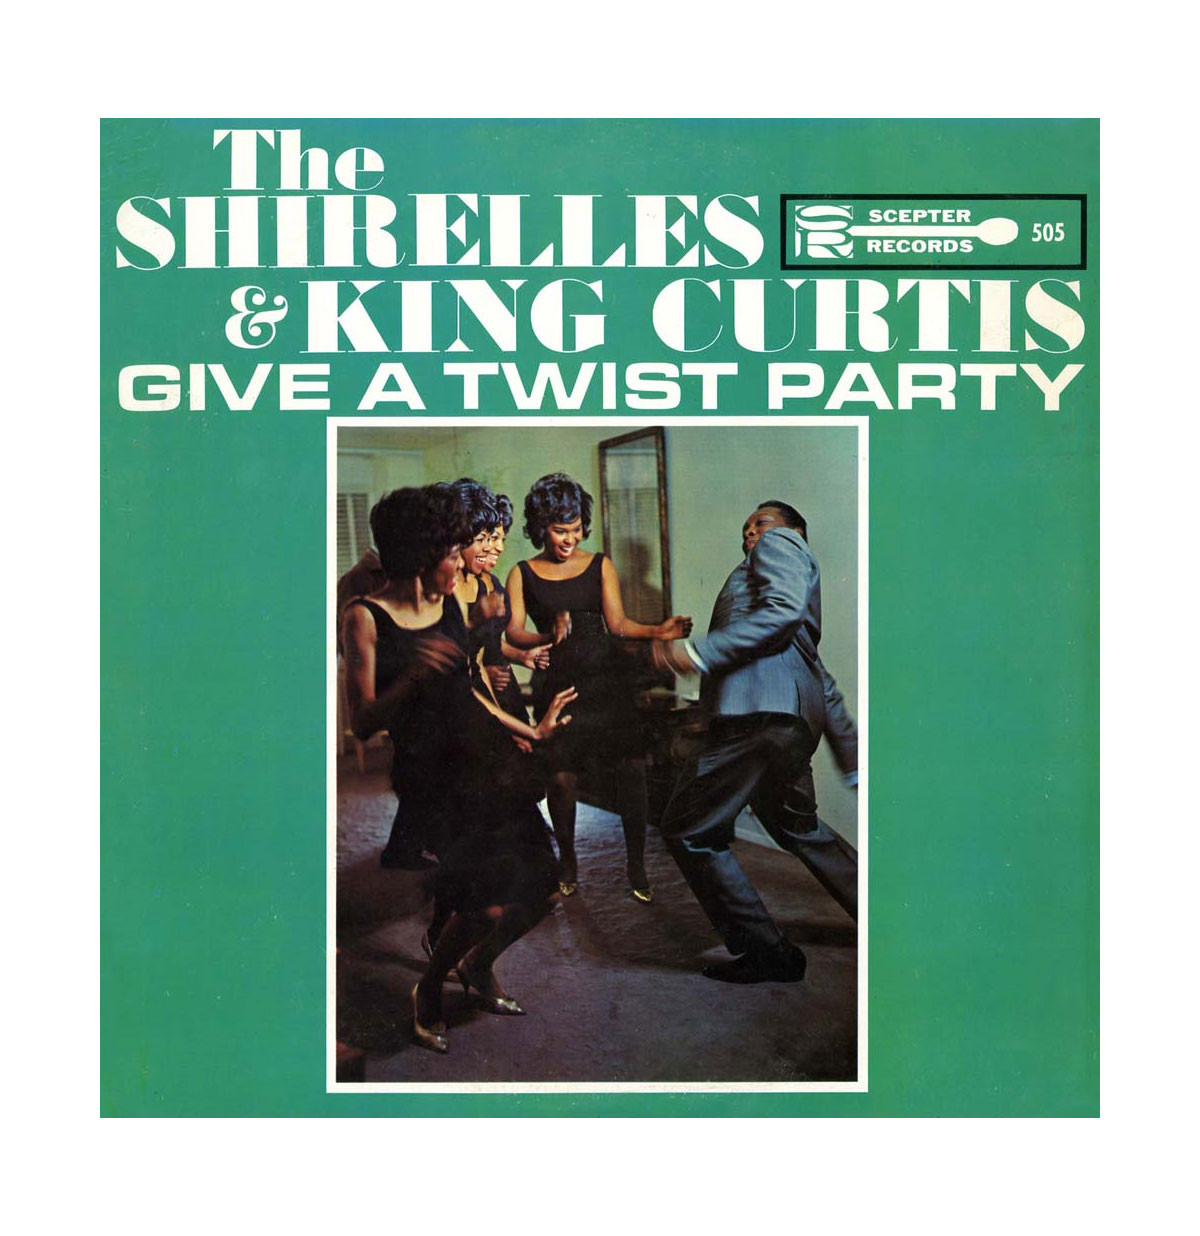 The Shirelles & King Curtis - Give A Twist Party LP